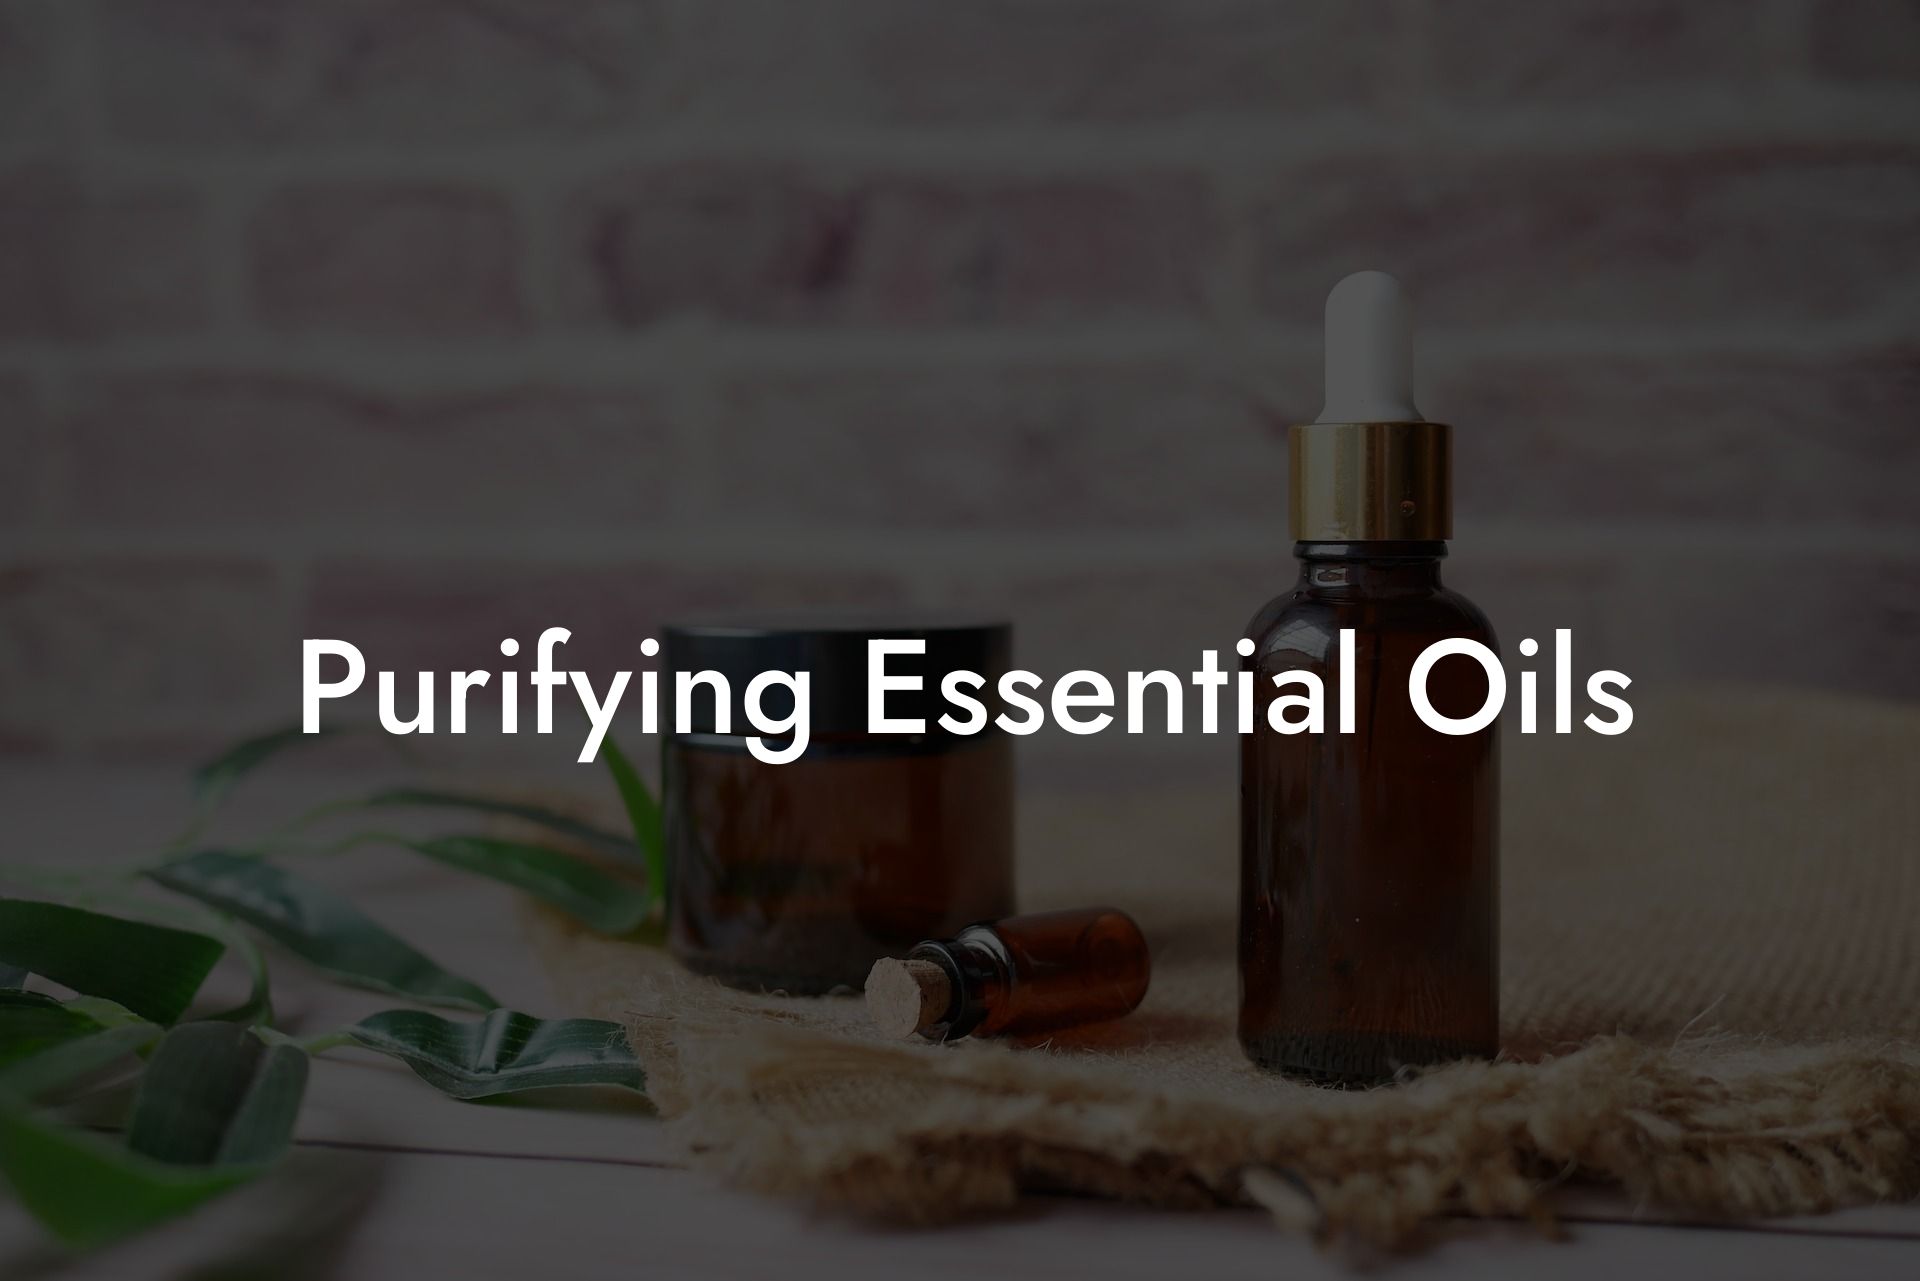 Purifying Essential Oils